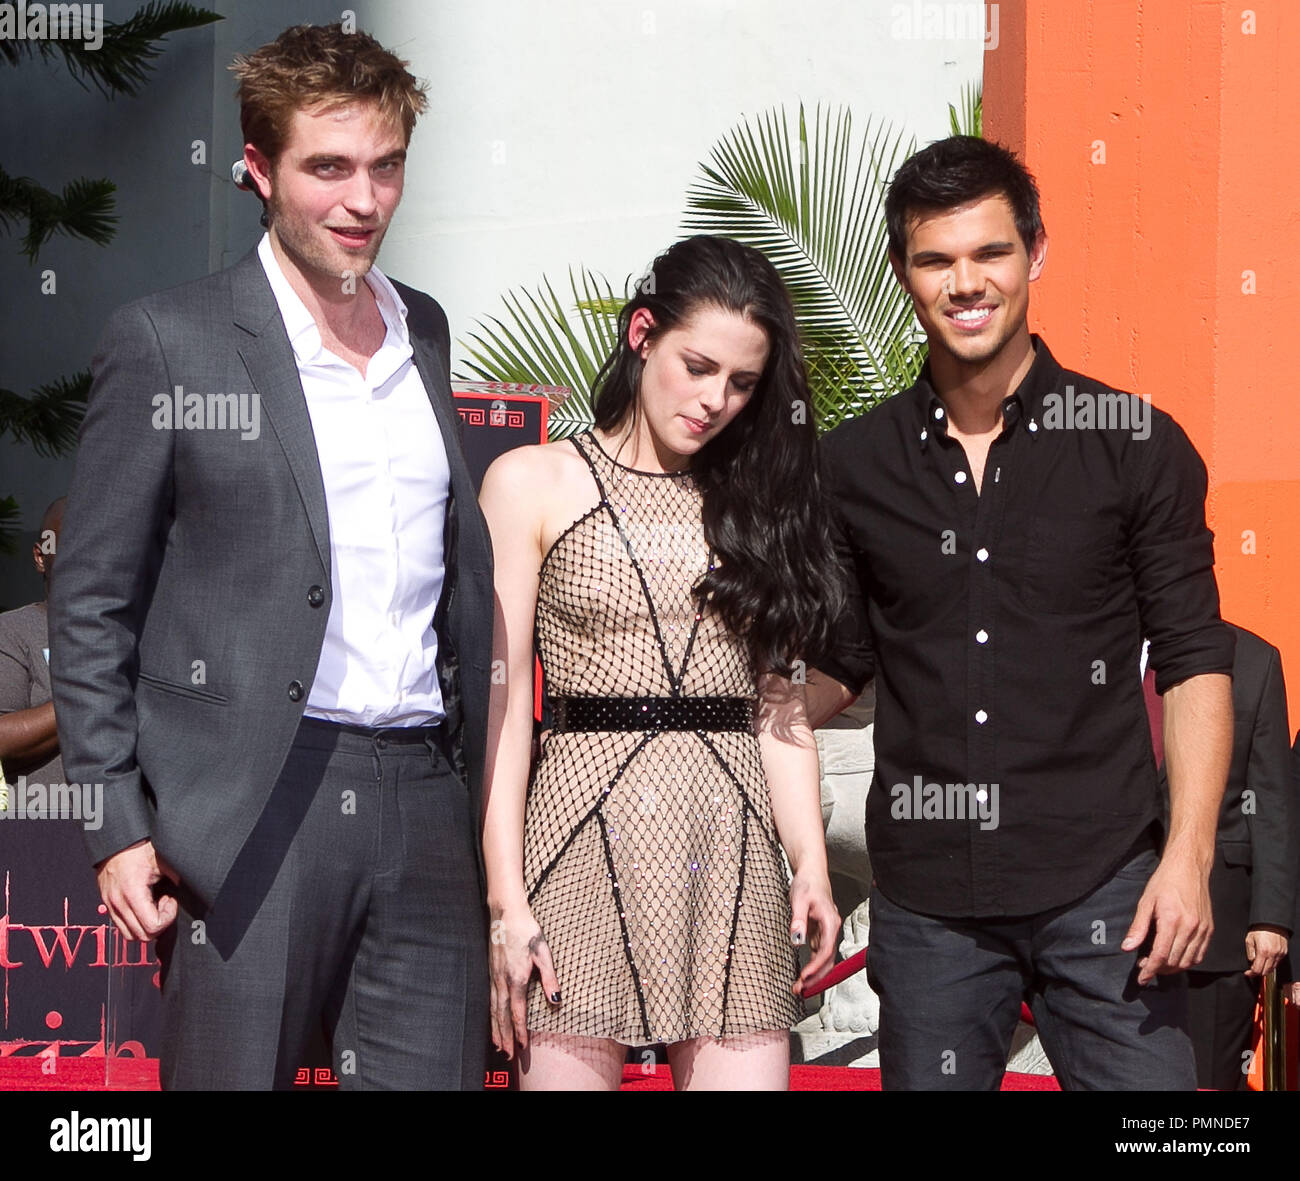 Robert Pattinson, Kristen Stewart & Taylor Lautner at the 'Twilight' Trio Robert Pattinson, Kristen Stewart and Taylor Lautner Hand And Footprint Ceremony held at Grauman's Mann Chinese Theatre in Hollywood, CA. The event took place on Thursday, November 3, 2011. Photo by John Salangsang/ PRPP/ PictureLux Stock Photo